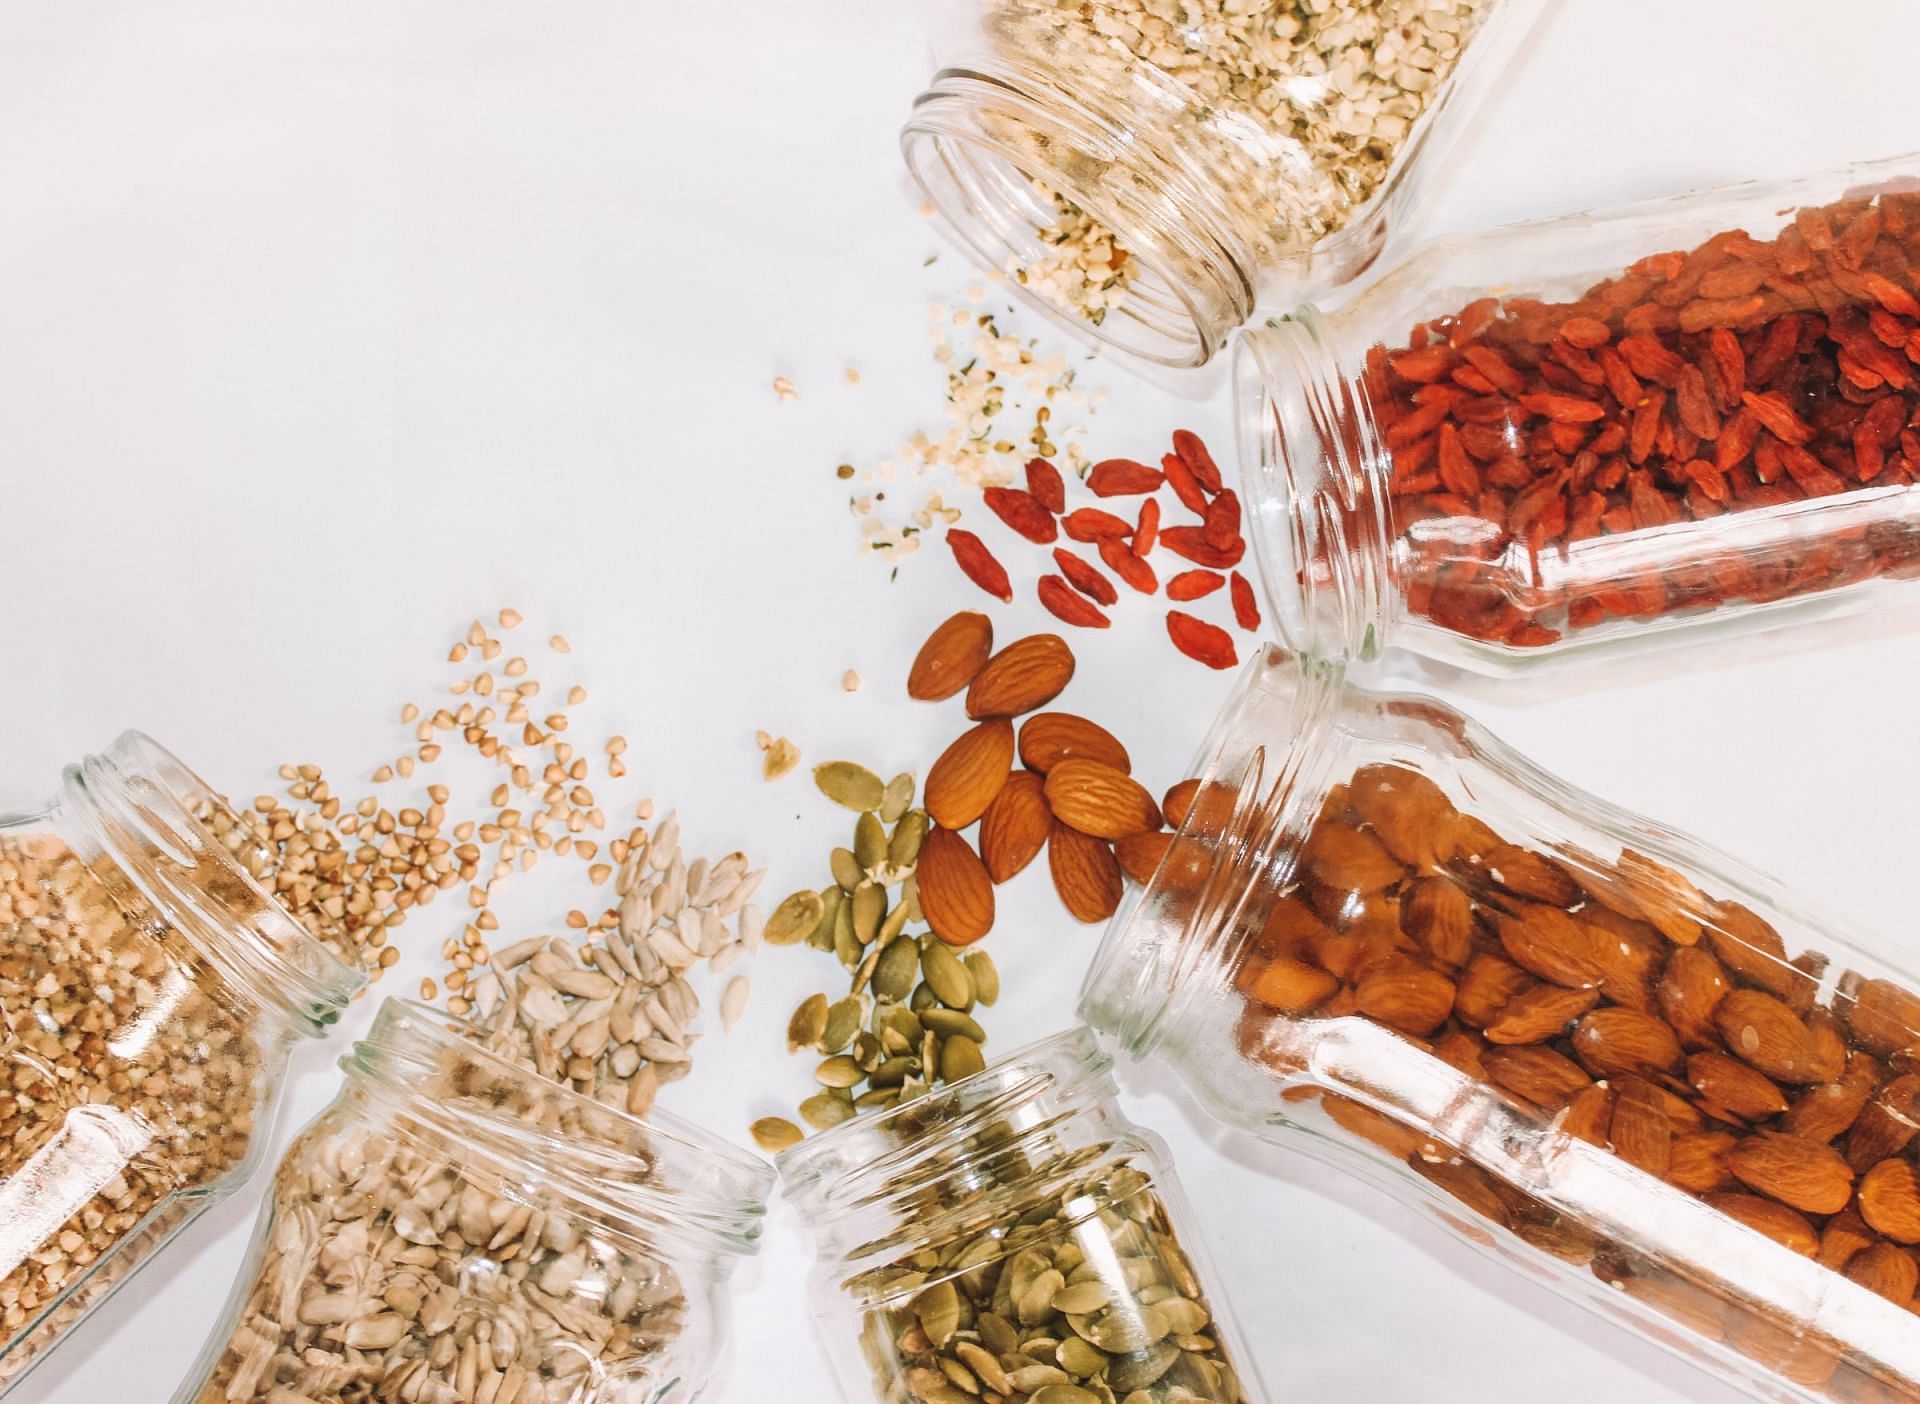 Foods with complex carbohydrates are the most beneficial (Image via Unsplash/ Maddi Bazzocco)